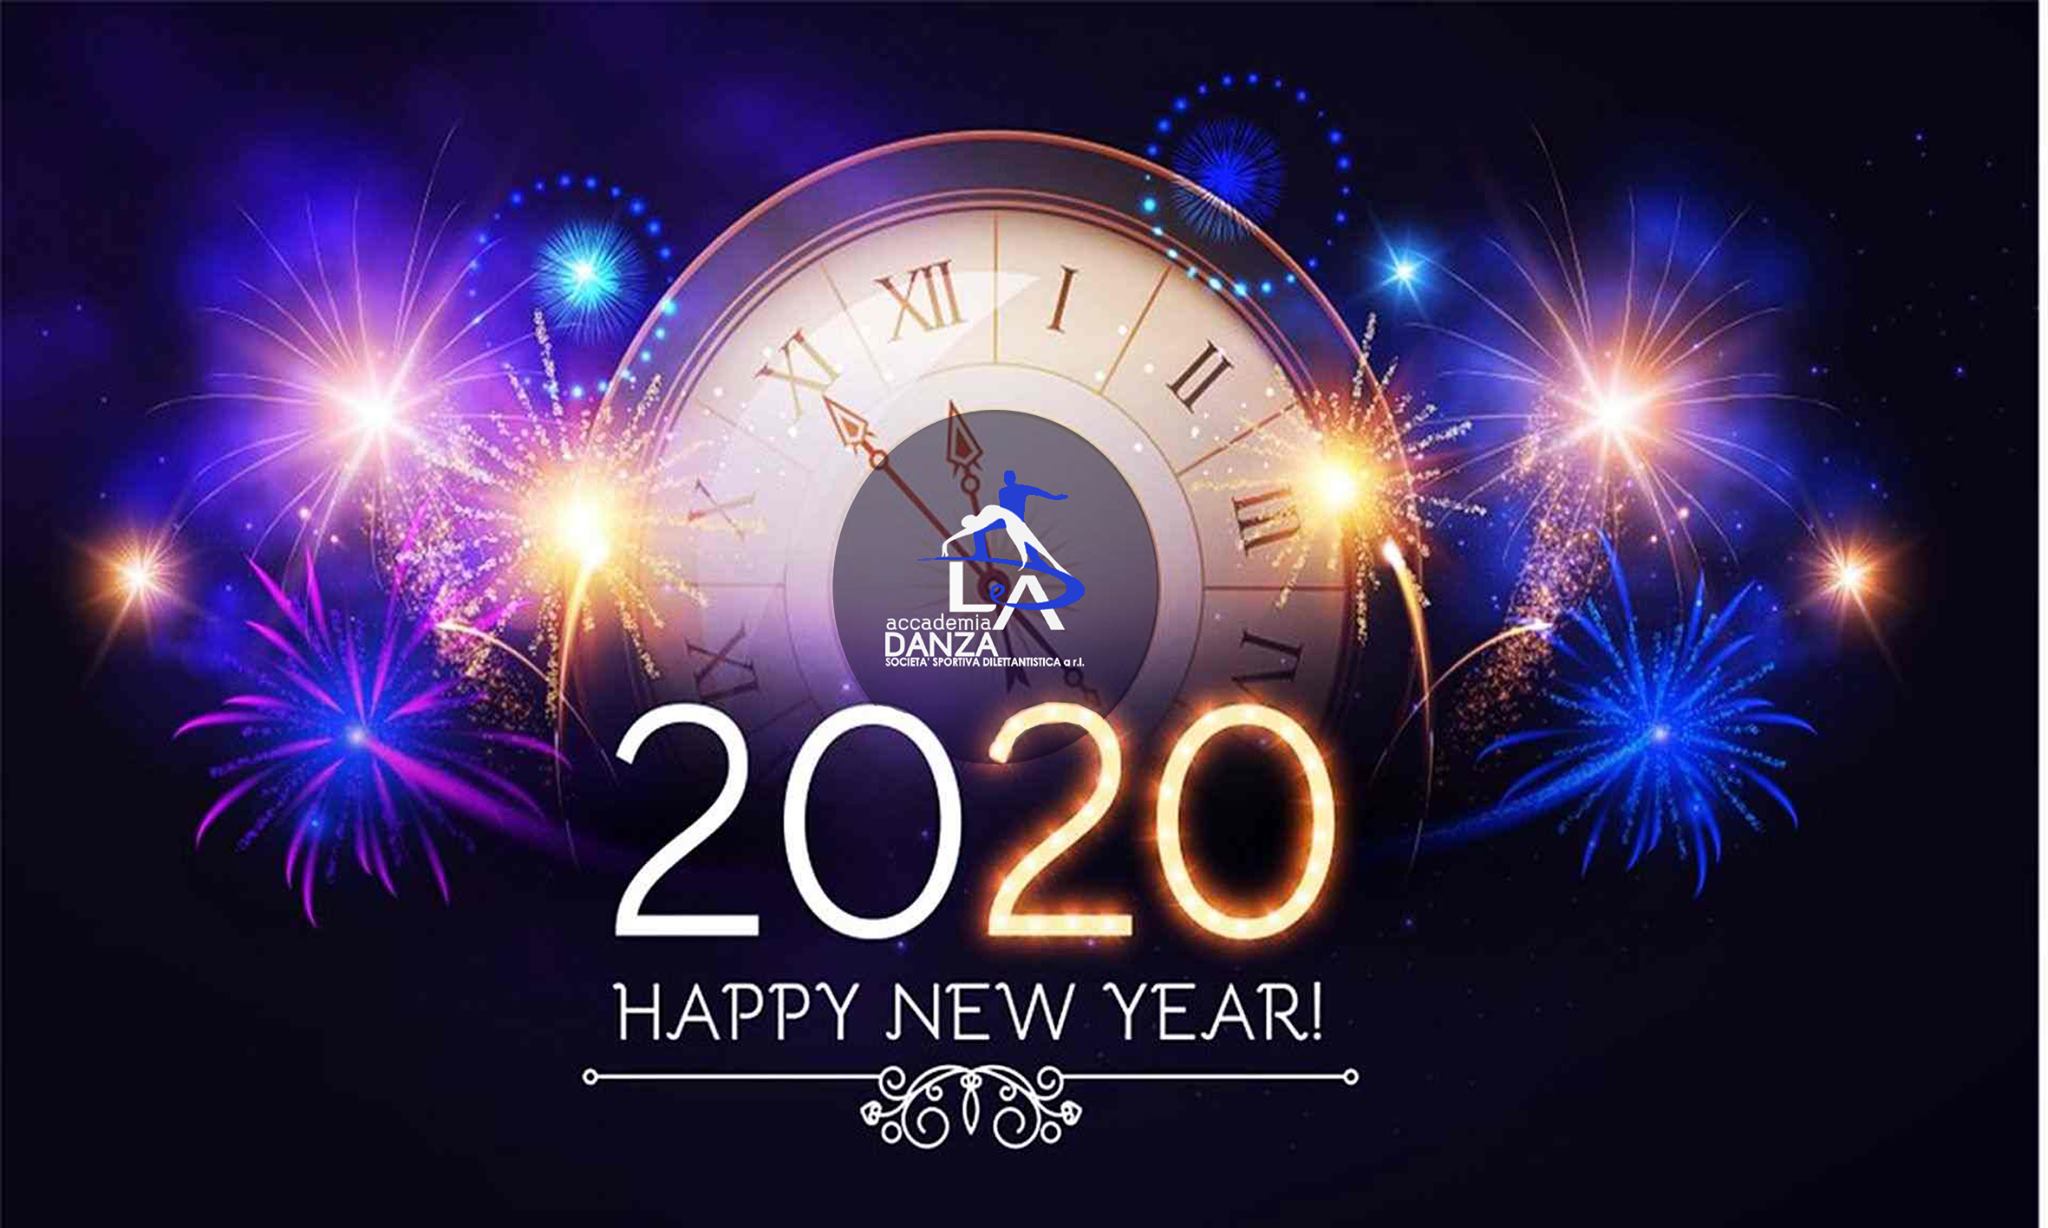 New year's song. Новый год 2020 год. Happy New year картинки. Happy New year 2020. C yjdsv 2020 ujjv.